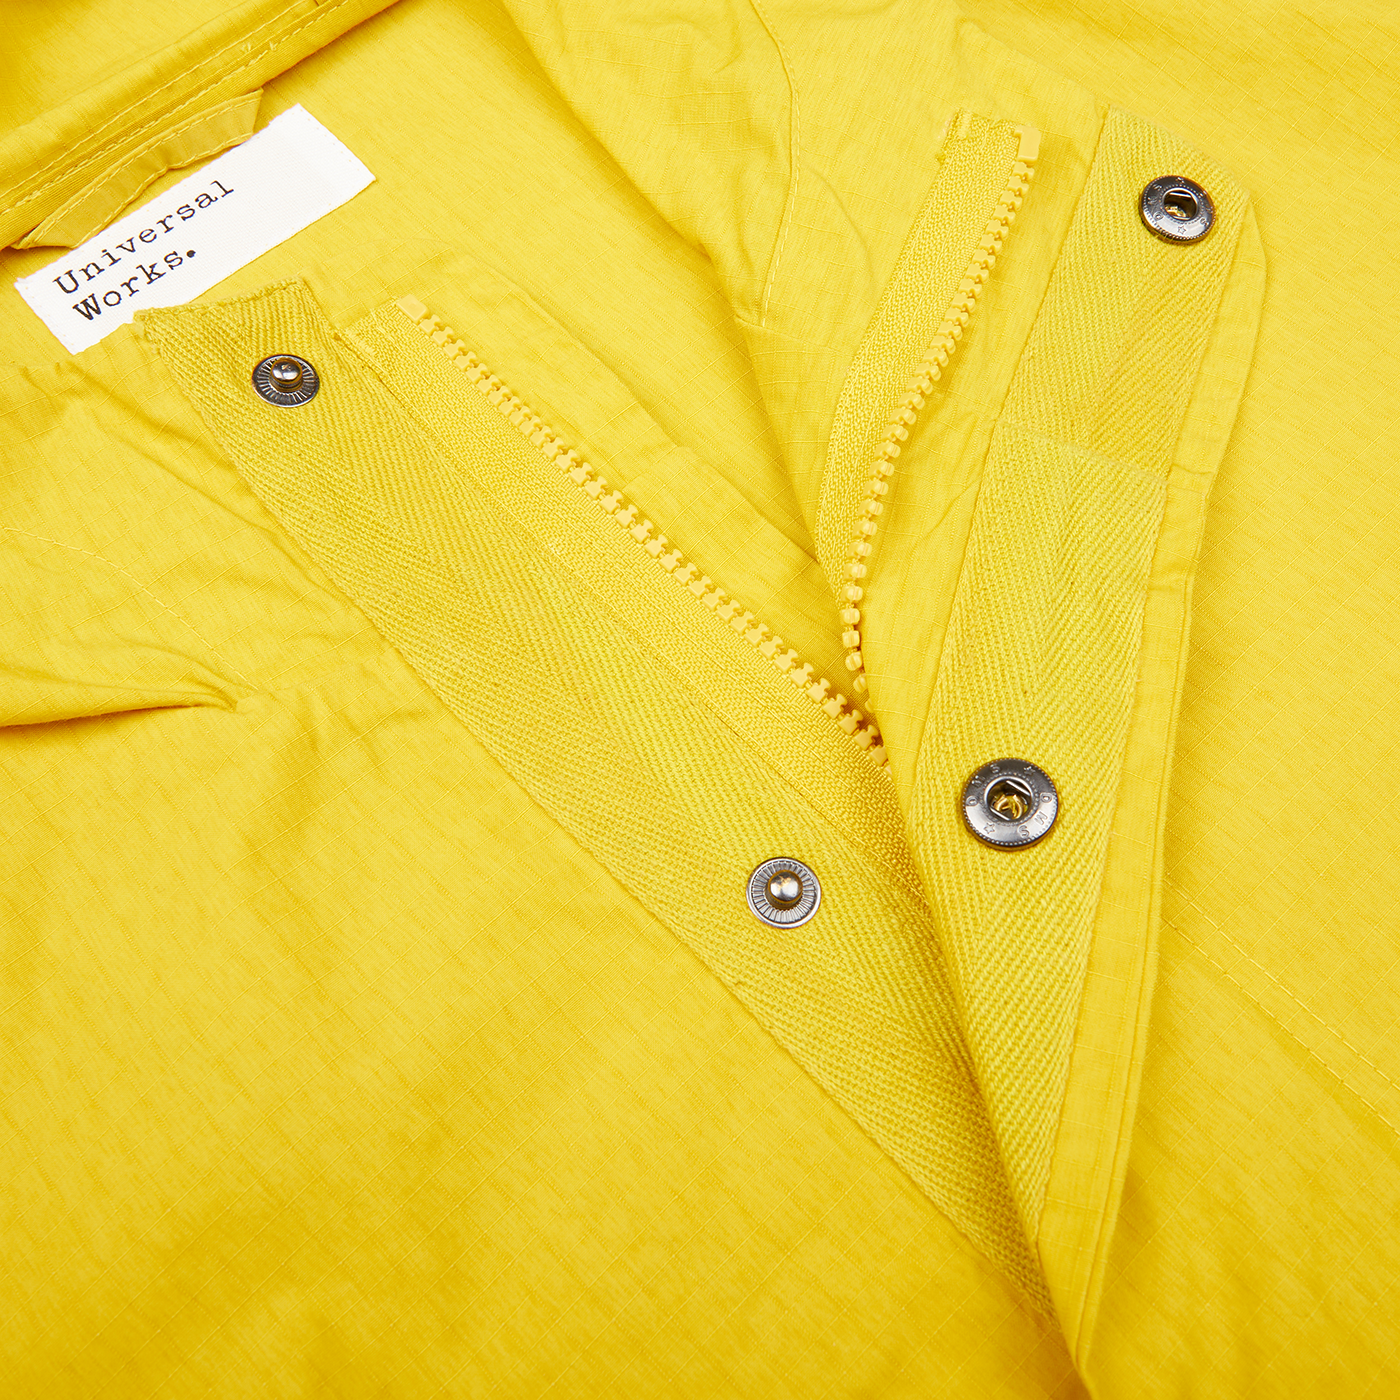 A close up of a yellow, water-resistant Universal Works Stanedge Jacket with zippers.